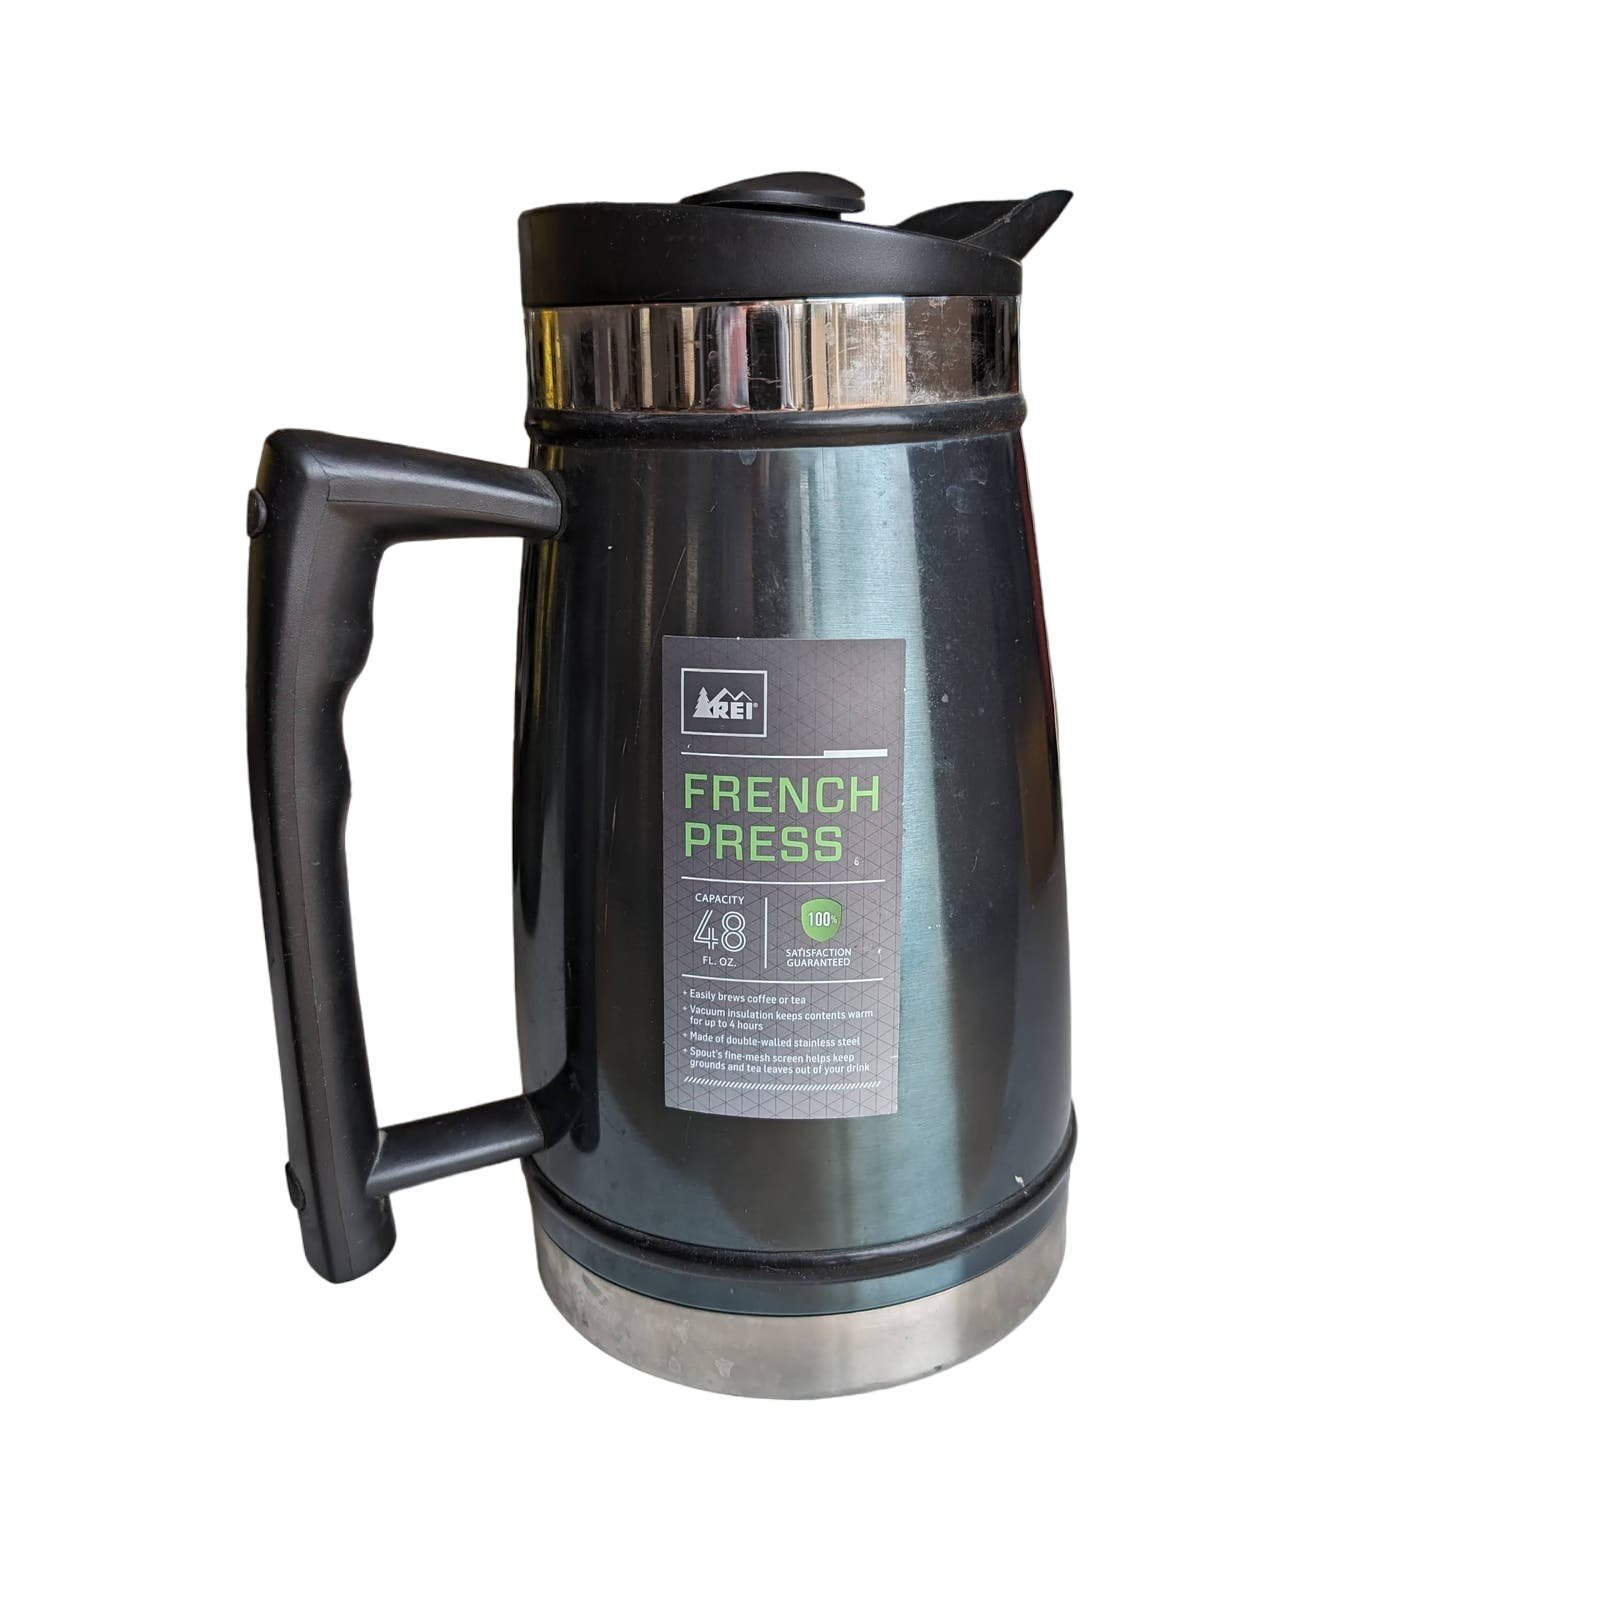 REI 48 oz Vacuum Insulated Double Wall Stainless Steel French Press Coffee Maker kwAclyRLy